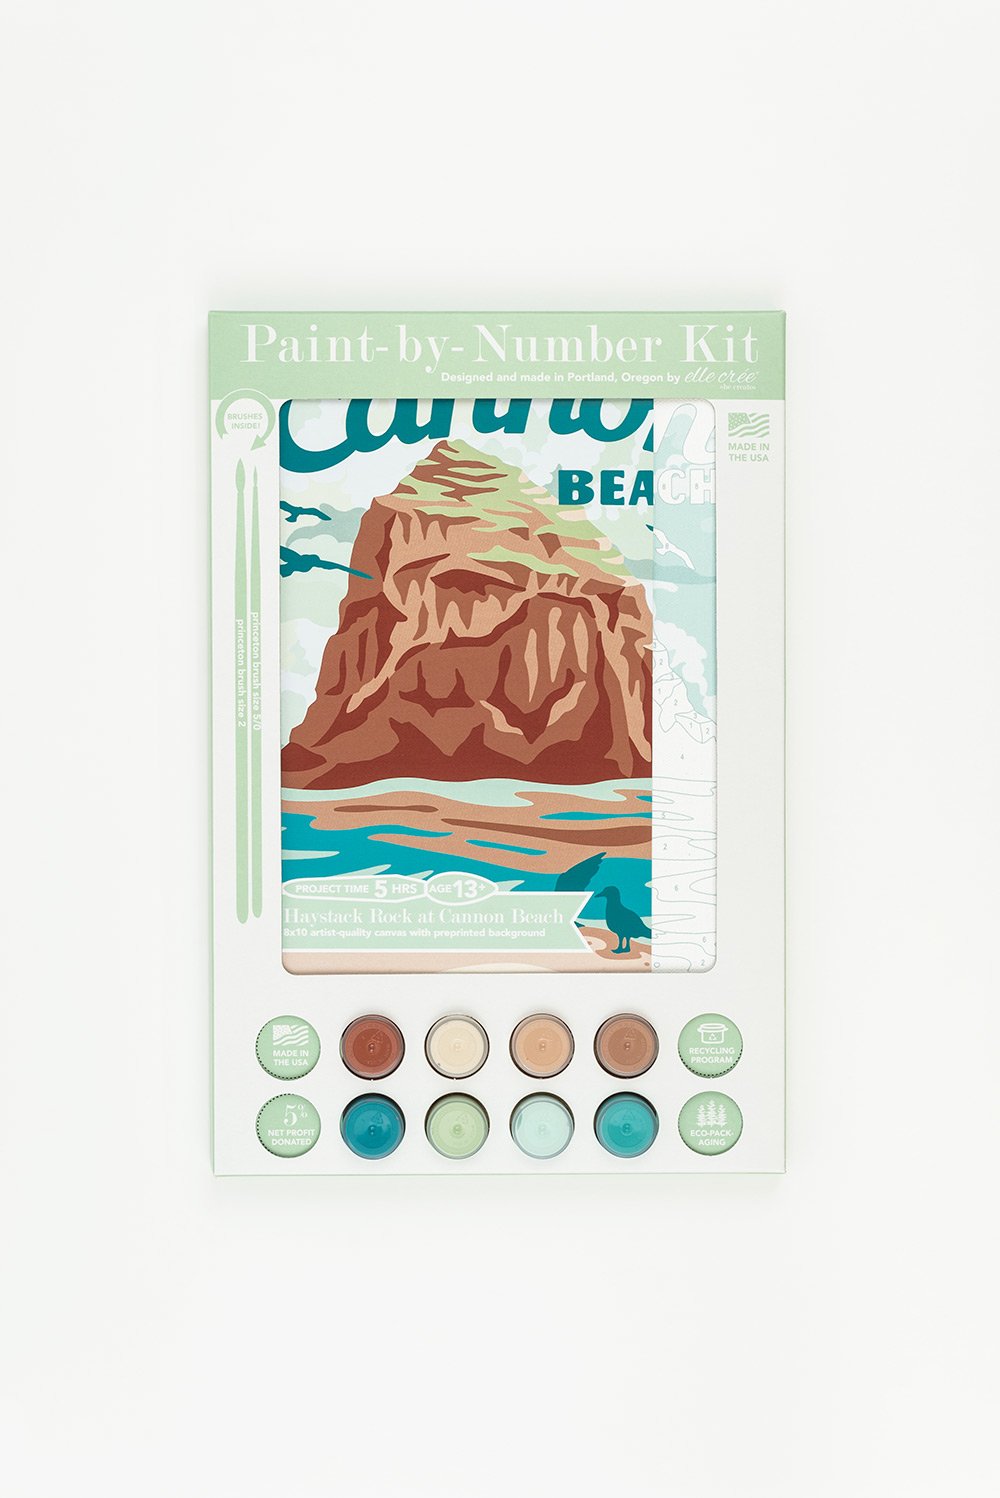 Haystack Rock at Cannon Beach | Paint-by-Number Kits for Adults — Elle Crée  (she creates)